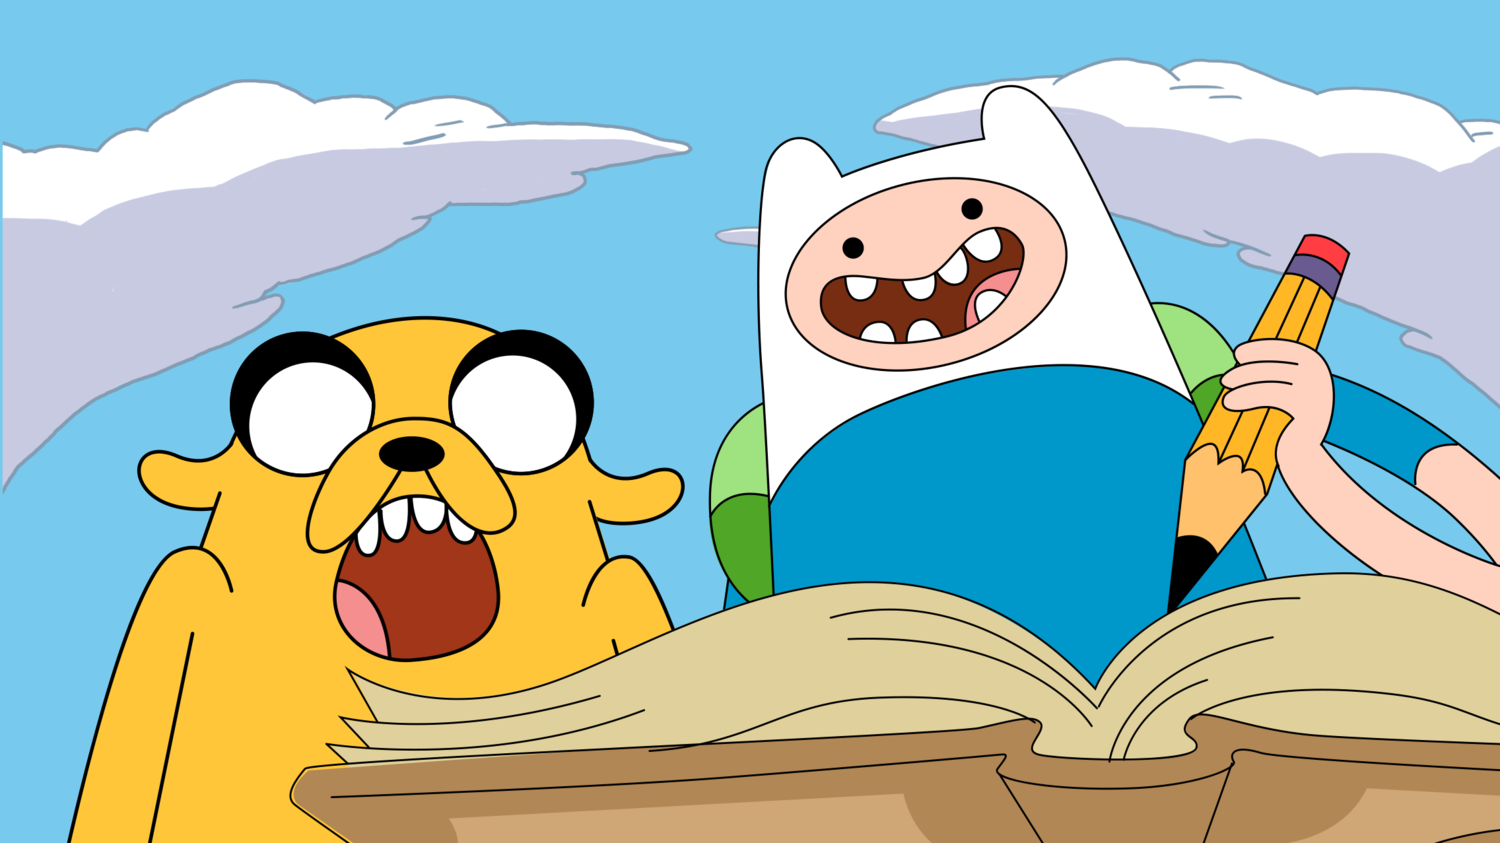 Explained: Here's How Adventure Time Helped Change the Cartoon Landscape